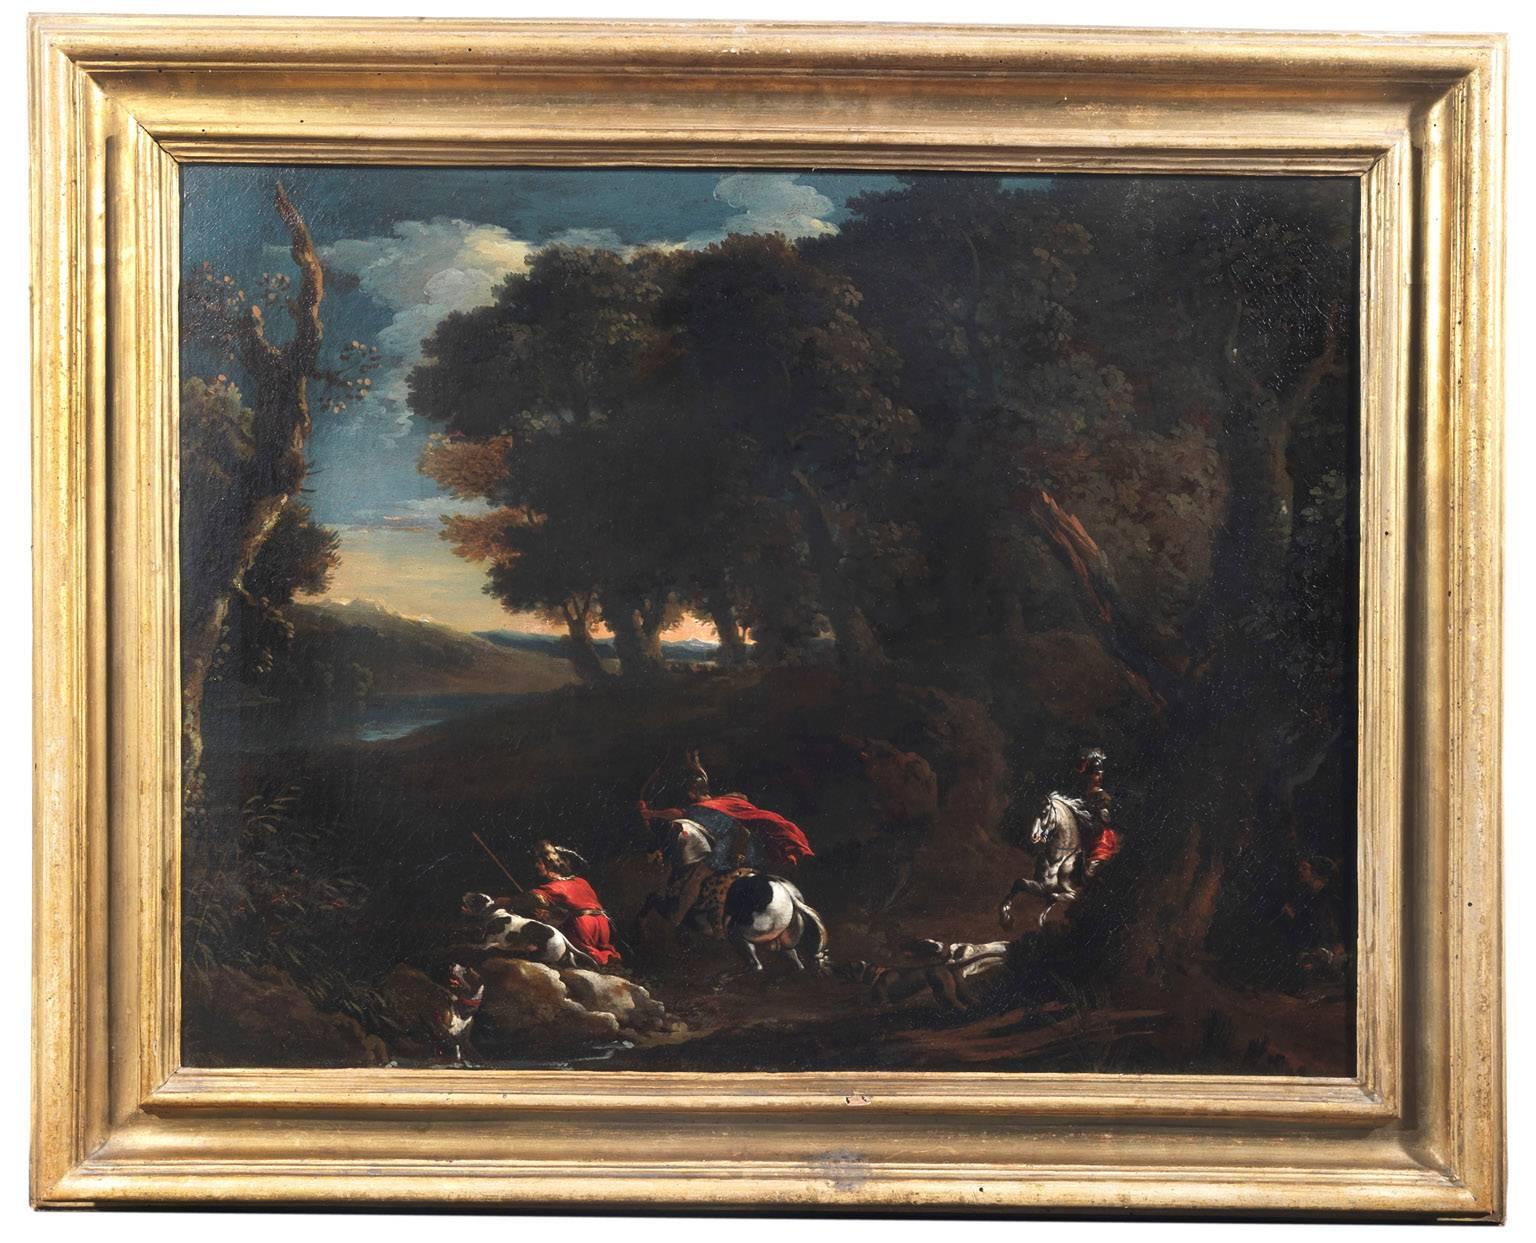 Painting of landscape with hunting scene